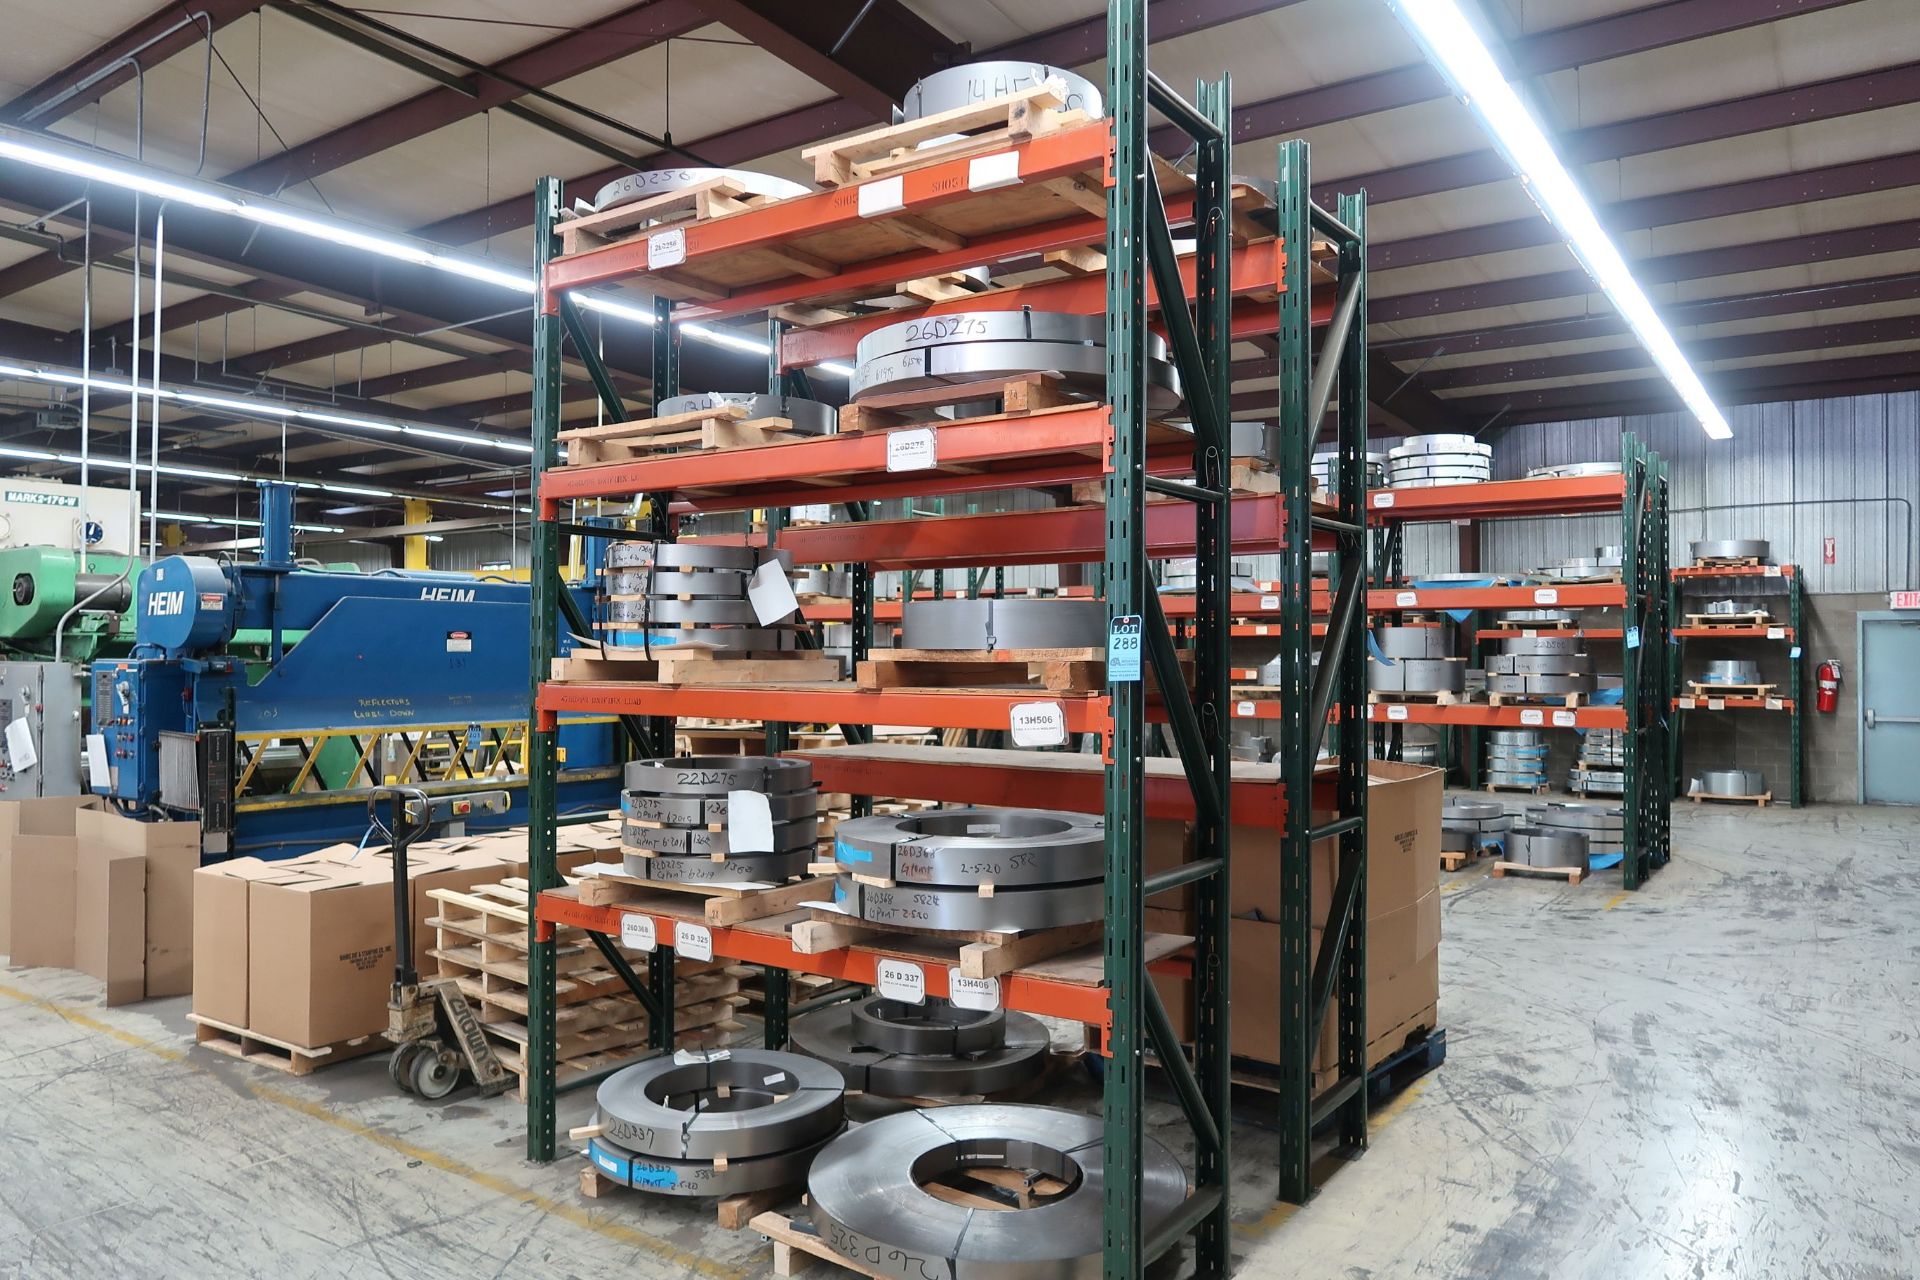 SECTIONS 84" X 24" X 132" ADJUSTABLE BEAM PALLET RACK **RACKING ONLY - DELAYED REMOVAL - PICK UP 10